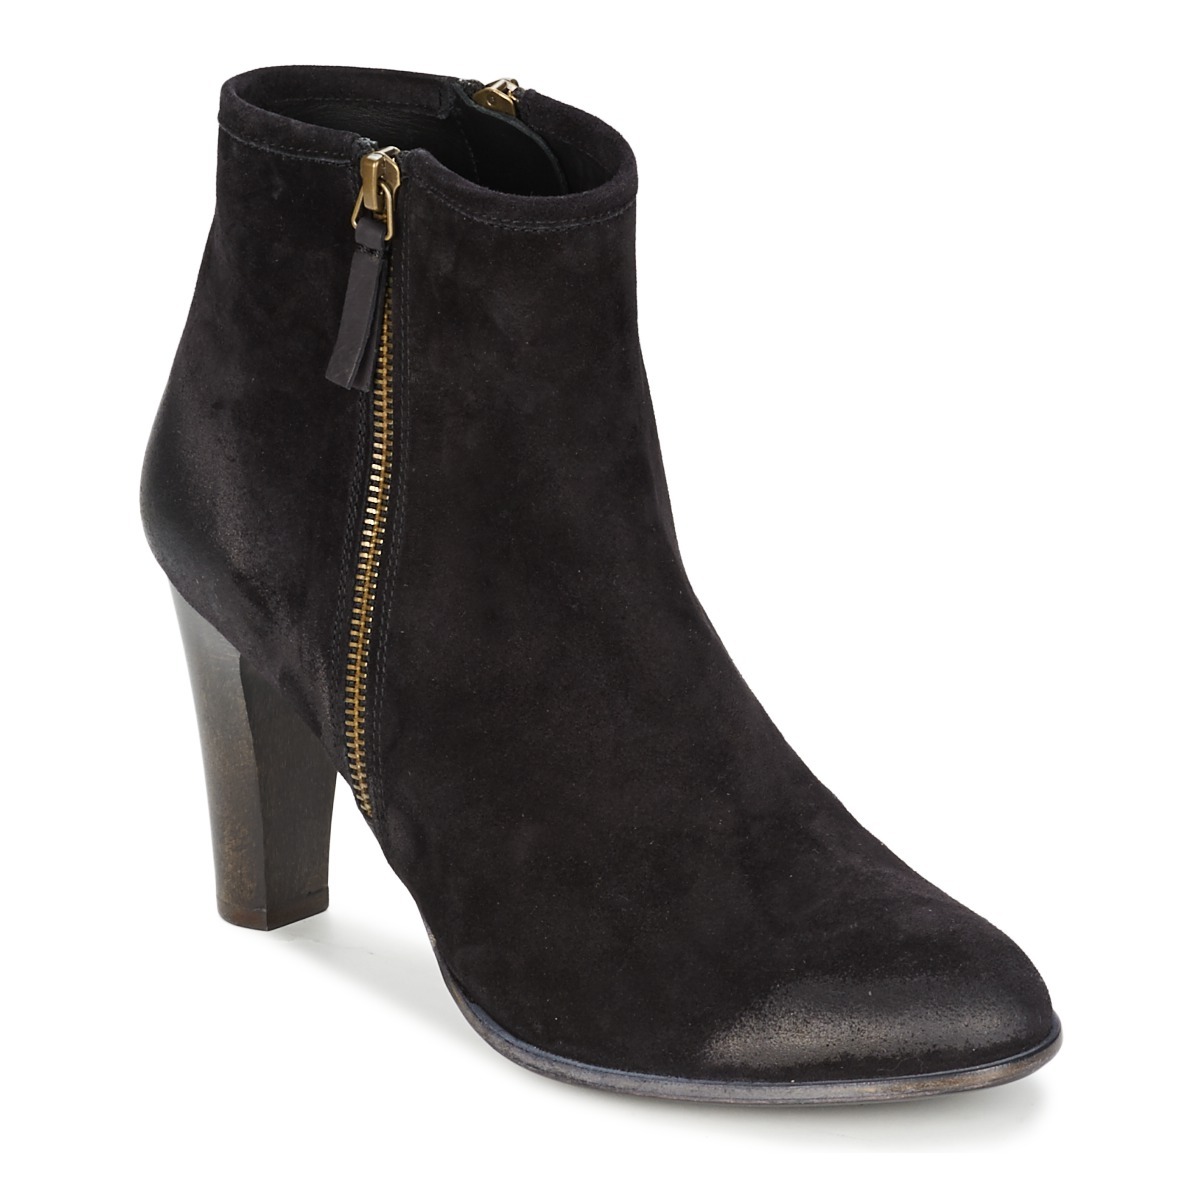 N.D.C. Lady Ankle Boots Black by Spartoo GOOFASH